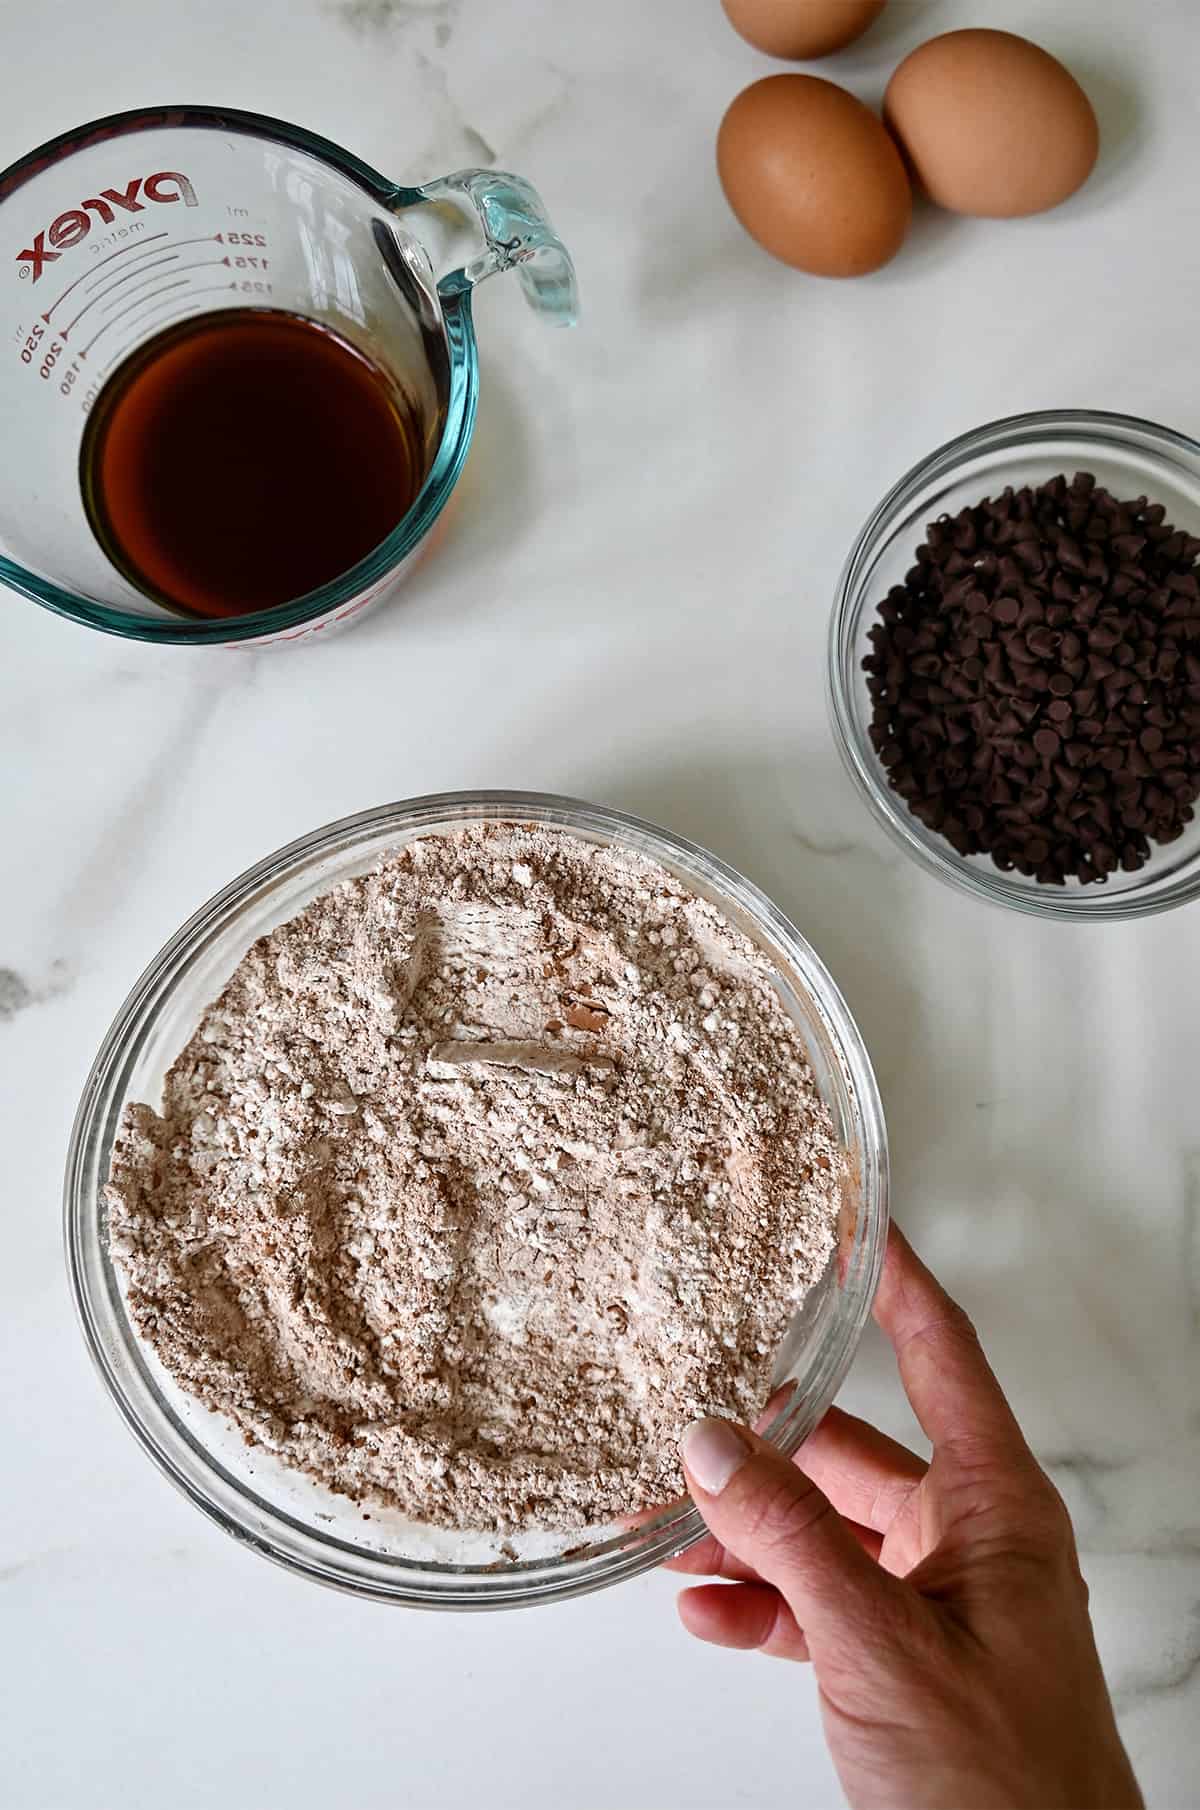 A medium bowl containing dry cake mix ingredients next to a small bowl with mini chocolate chips and a liquid measuring cup with coffee.